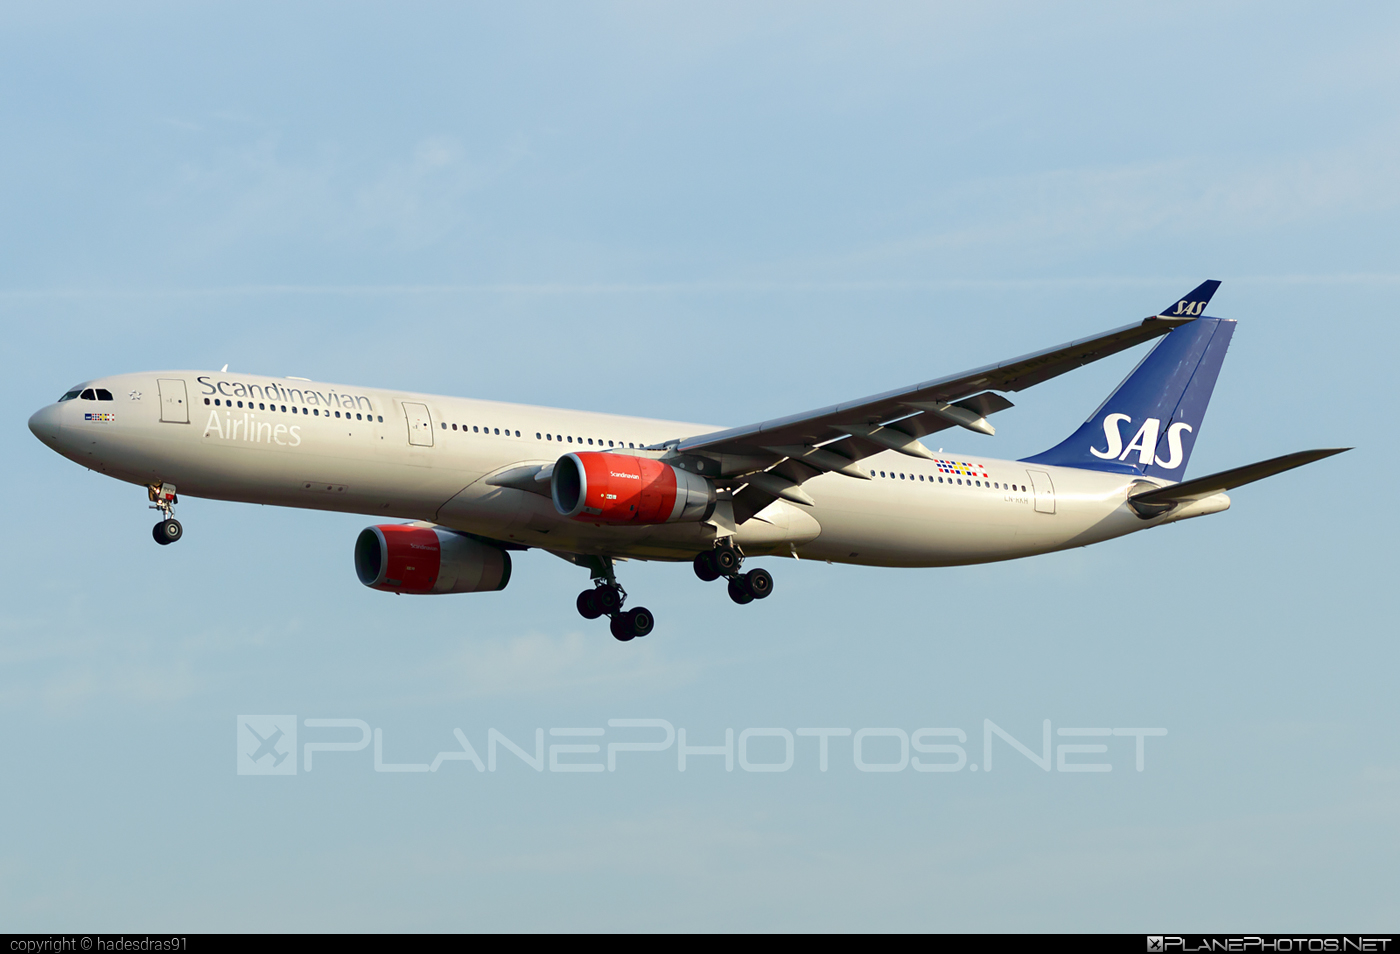 Airbus A330-343 - LN-RKH operated by Scandinavian Airlines (SAS) #a330 #a330family #airbus #airbus330 #sas #sasairlines #scandinavianairlines